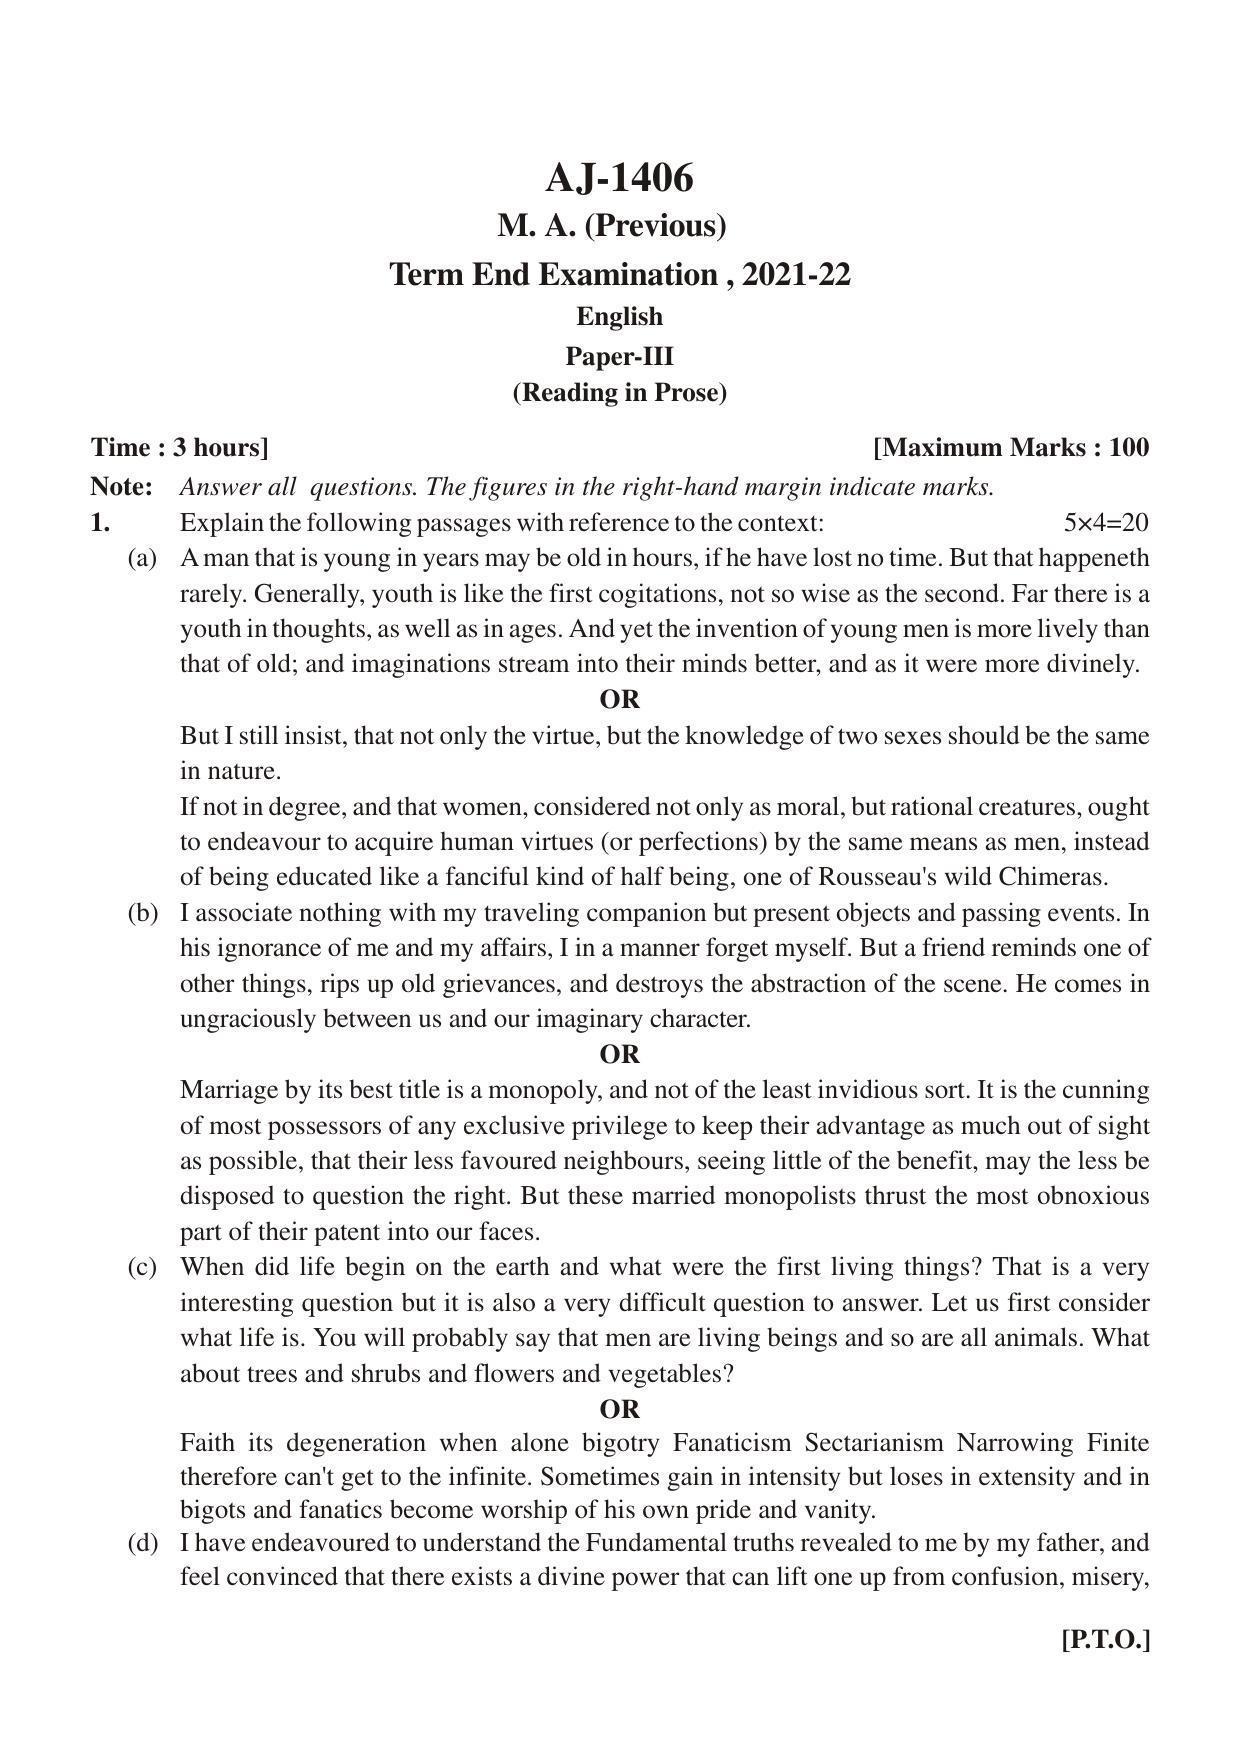 Bilaspur University Question Paper 2021-2022:M.A (Pravious) English Readings In Prose Paper 1 - Page 1